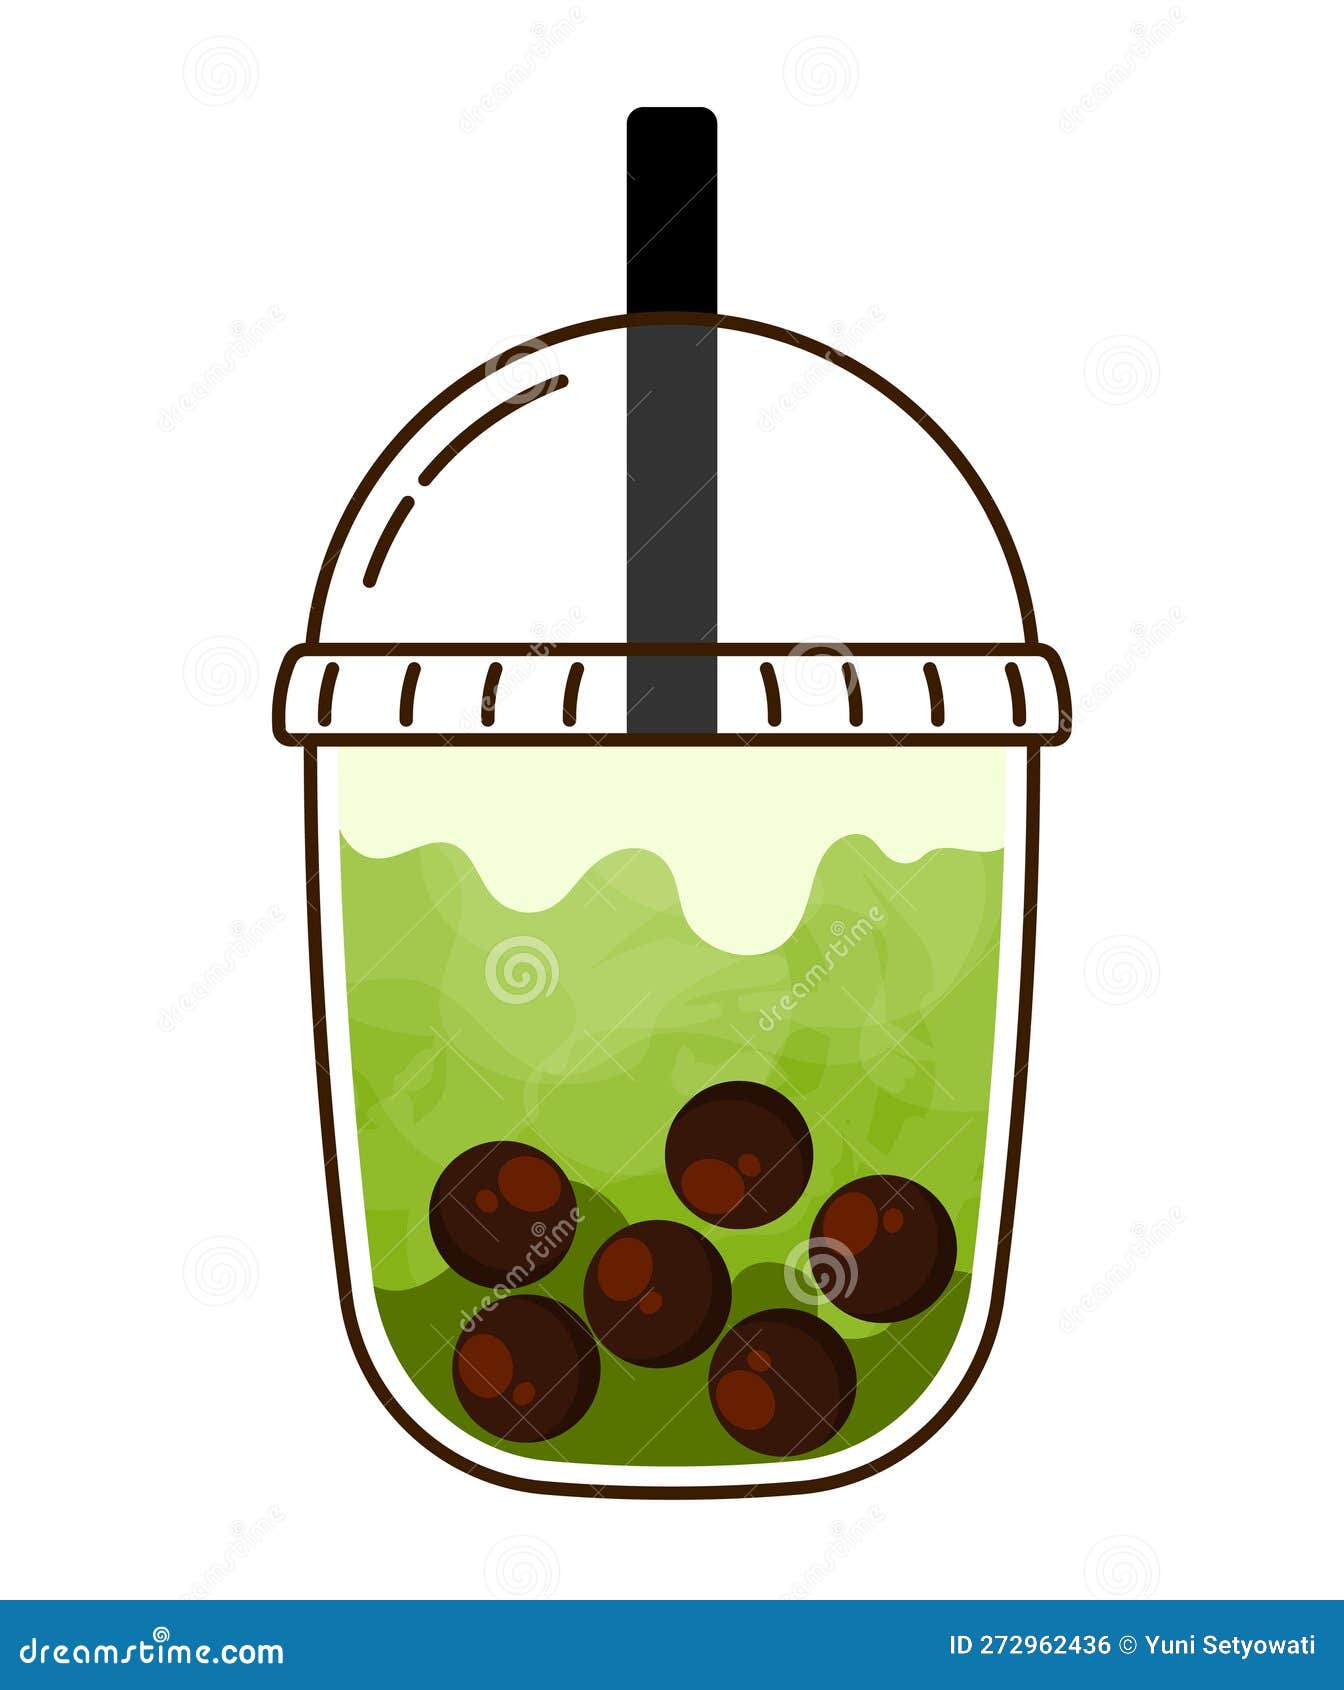 https://thumbs.dreamstime.com/z/iced-green-thai-tea-latte-cute-cup-icon-cartoon-png-illustration-hand-drawn-bubble-black-straw-outline-graphic-272962436.jpg